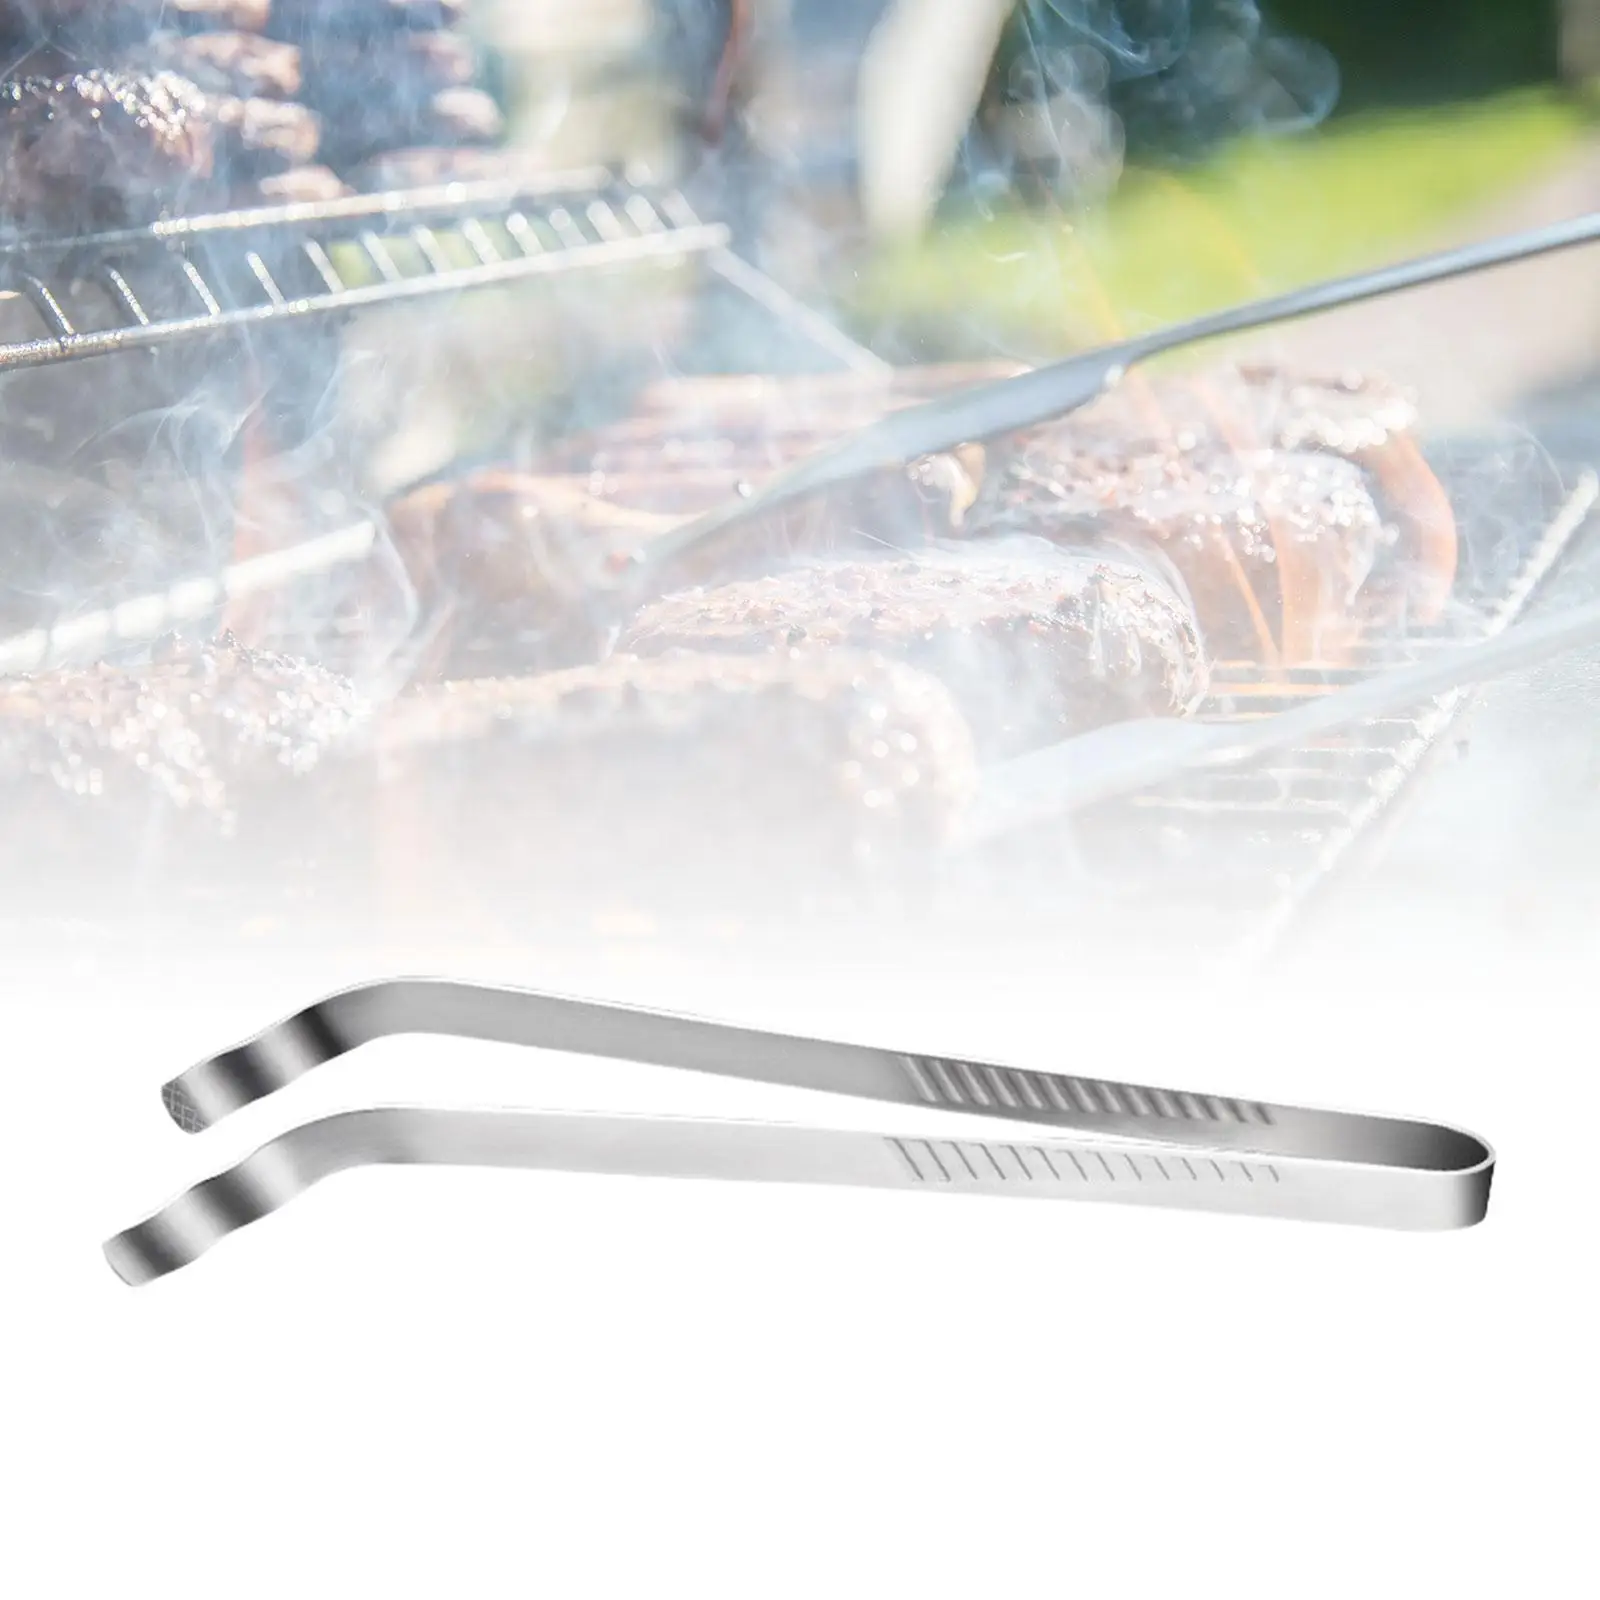 Barbecue Tongs Clamps Kitchen Cooking Tool Tweezer Nonslip Food Tongs Food Tongs for Picnic Noodles Food Parties BBQ Baking